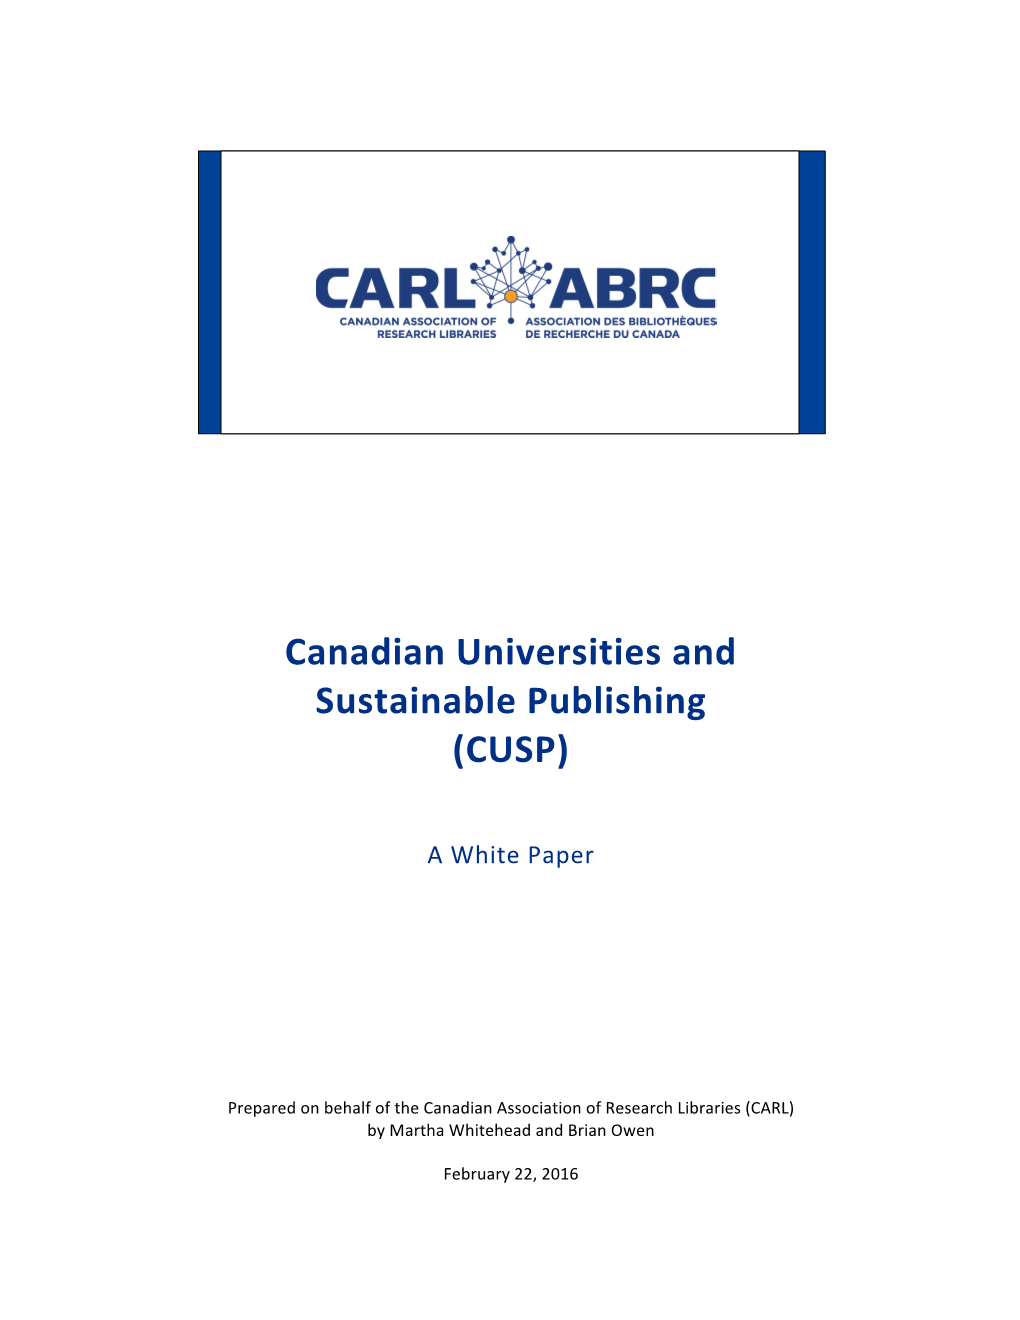 CUSP: Canadian Universities and Sustainable Publishing (2016)